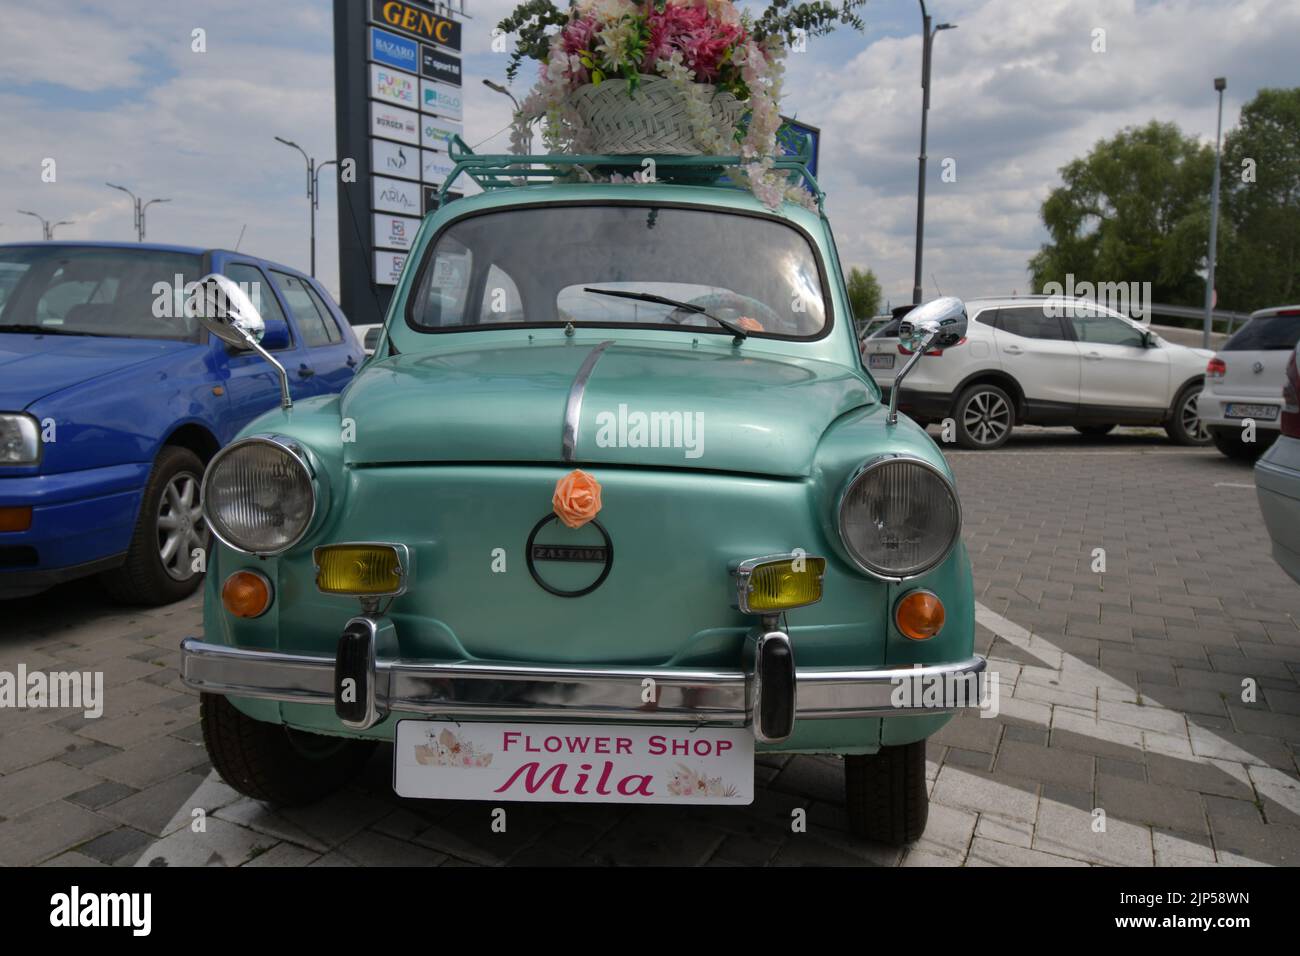 The legendary car supermini Zastava 750 (Fiat 600) which was produced from 1955 to 1985 parked in the front of the flower shop, decorated with flowers Stock Photo